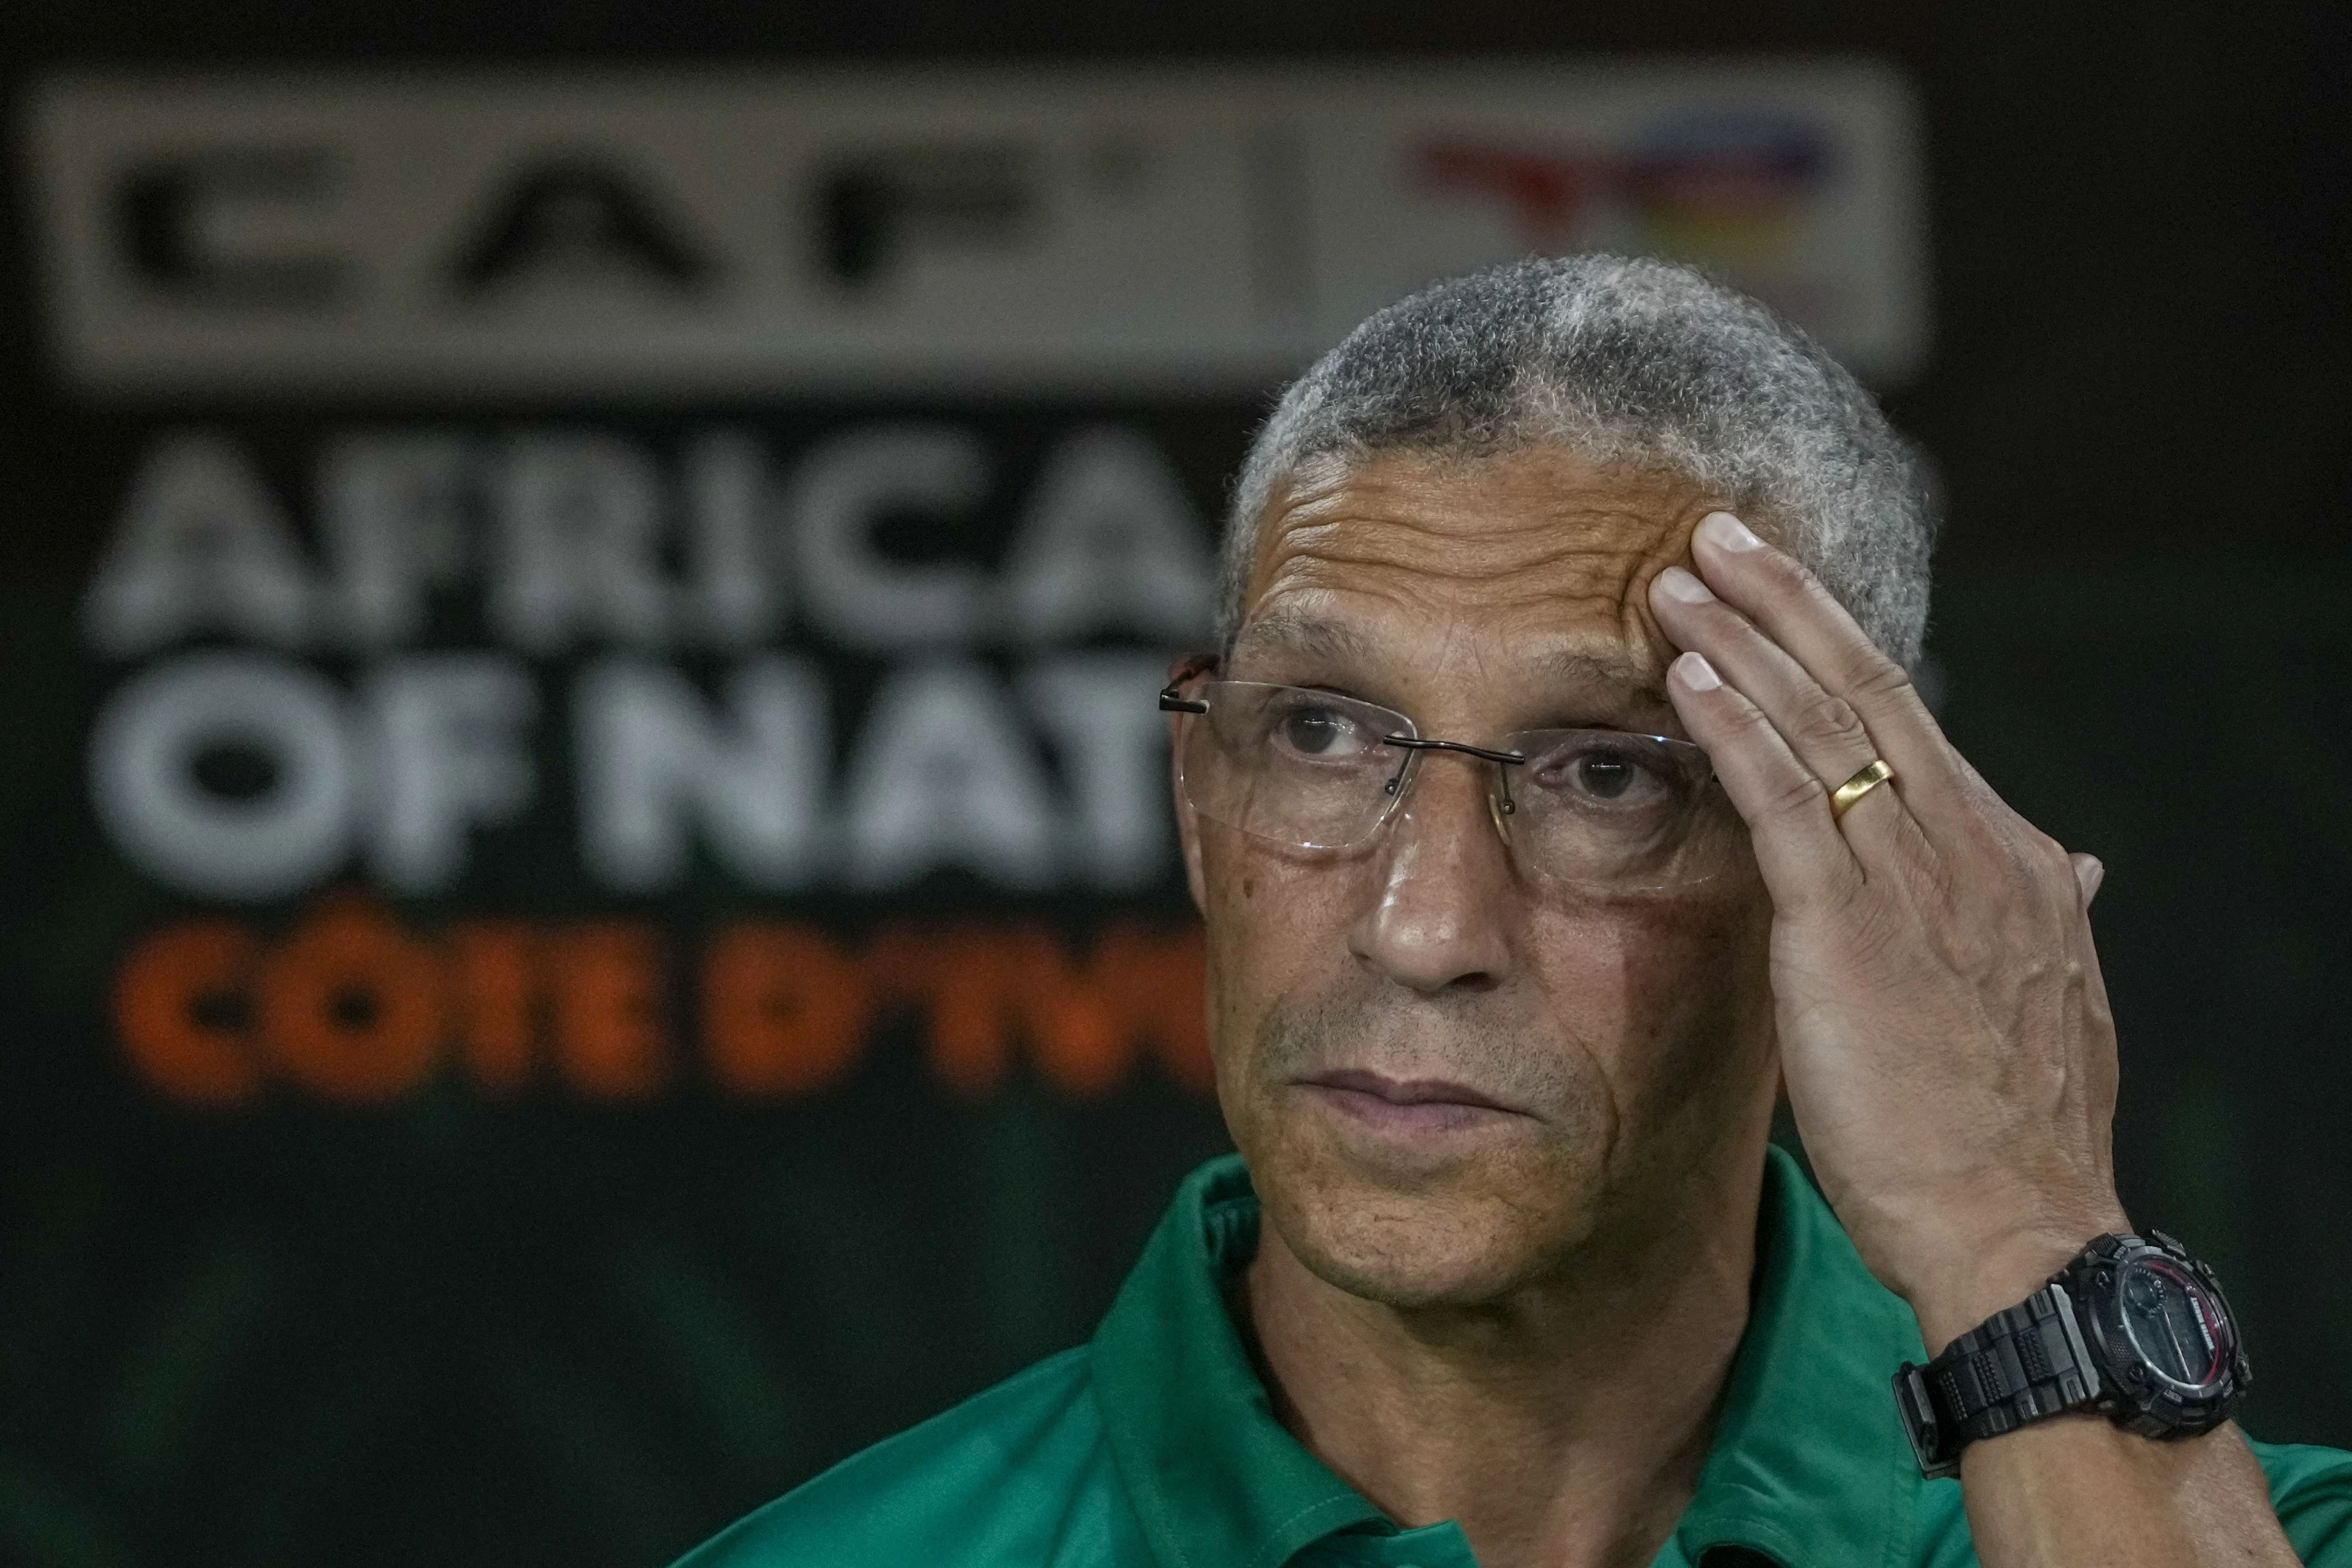 Chris Hughton, manager of Ghana, looks on during the game against Egypt at the Africa Cup of Nations at the Felix Houphouet-Boigny Stadium in Abidjan, Cote d'Ivoire, January 18, 2024. /AP